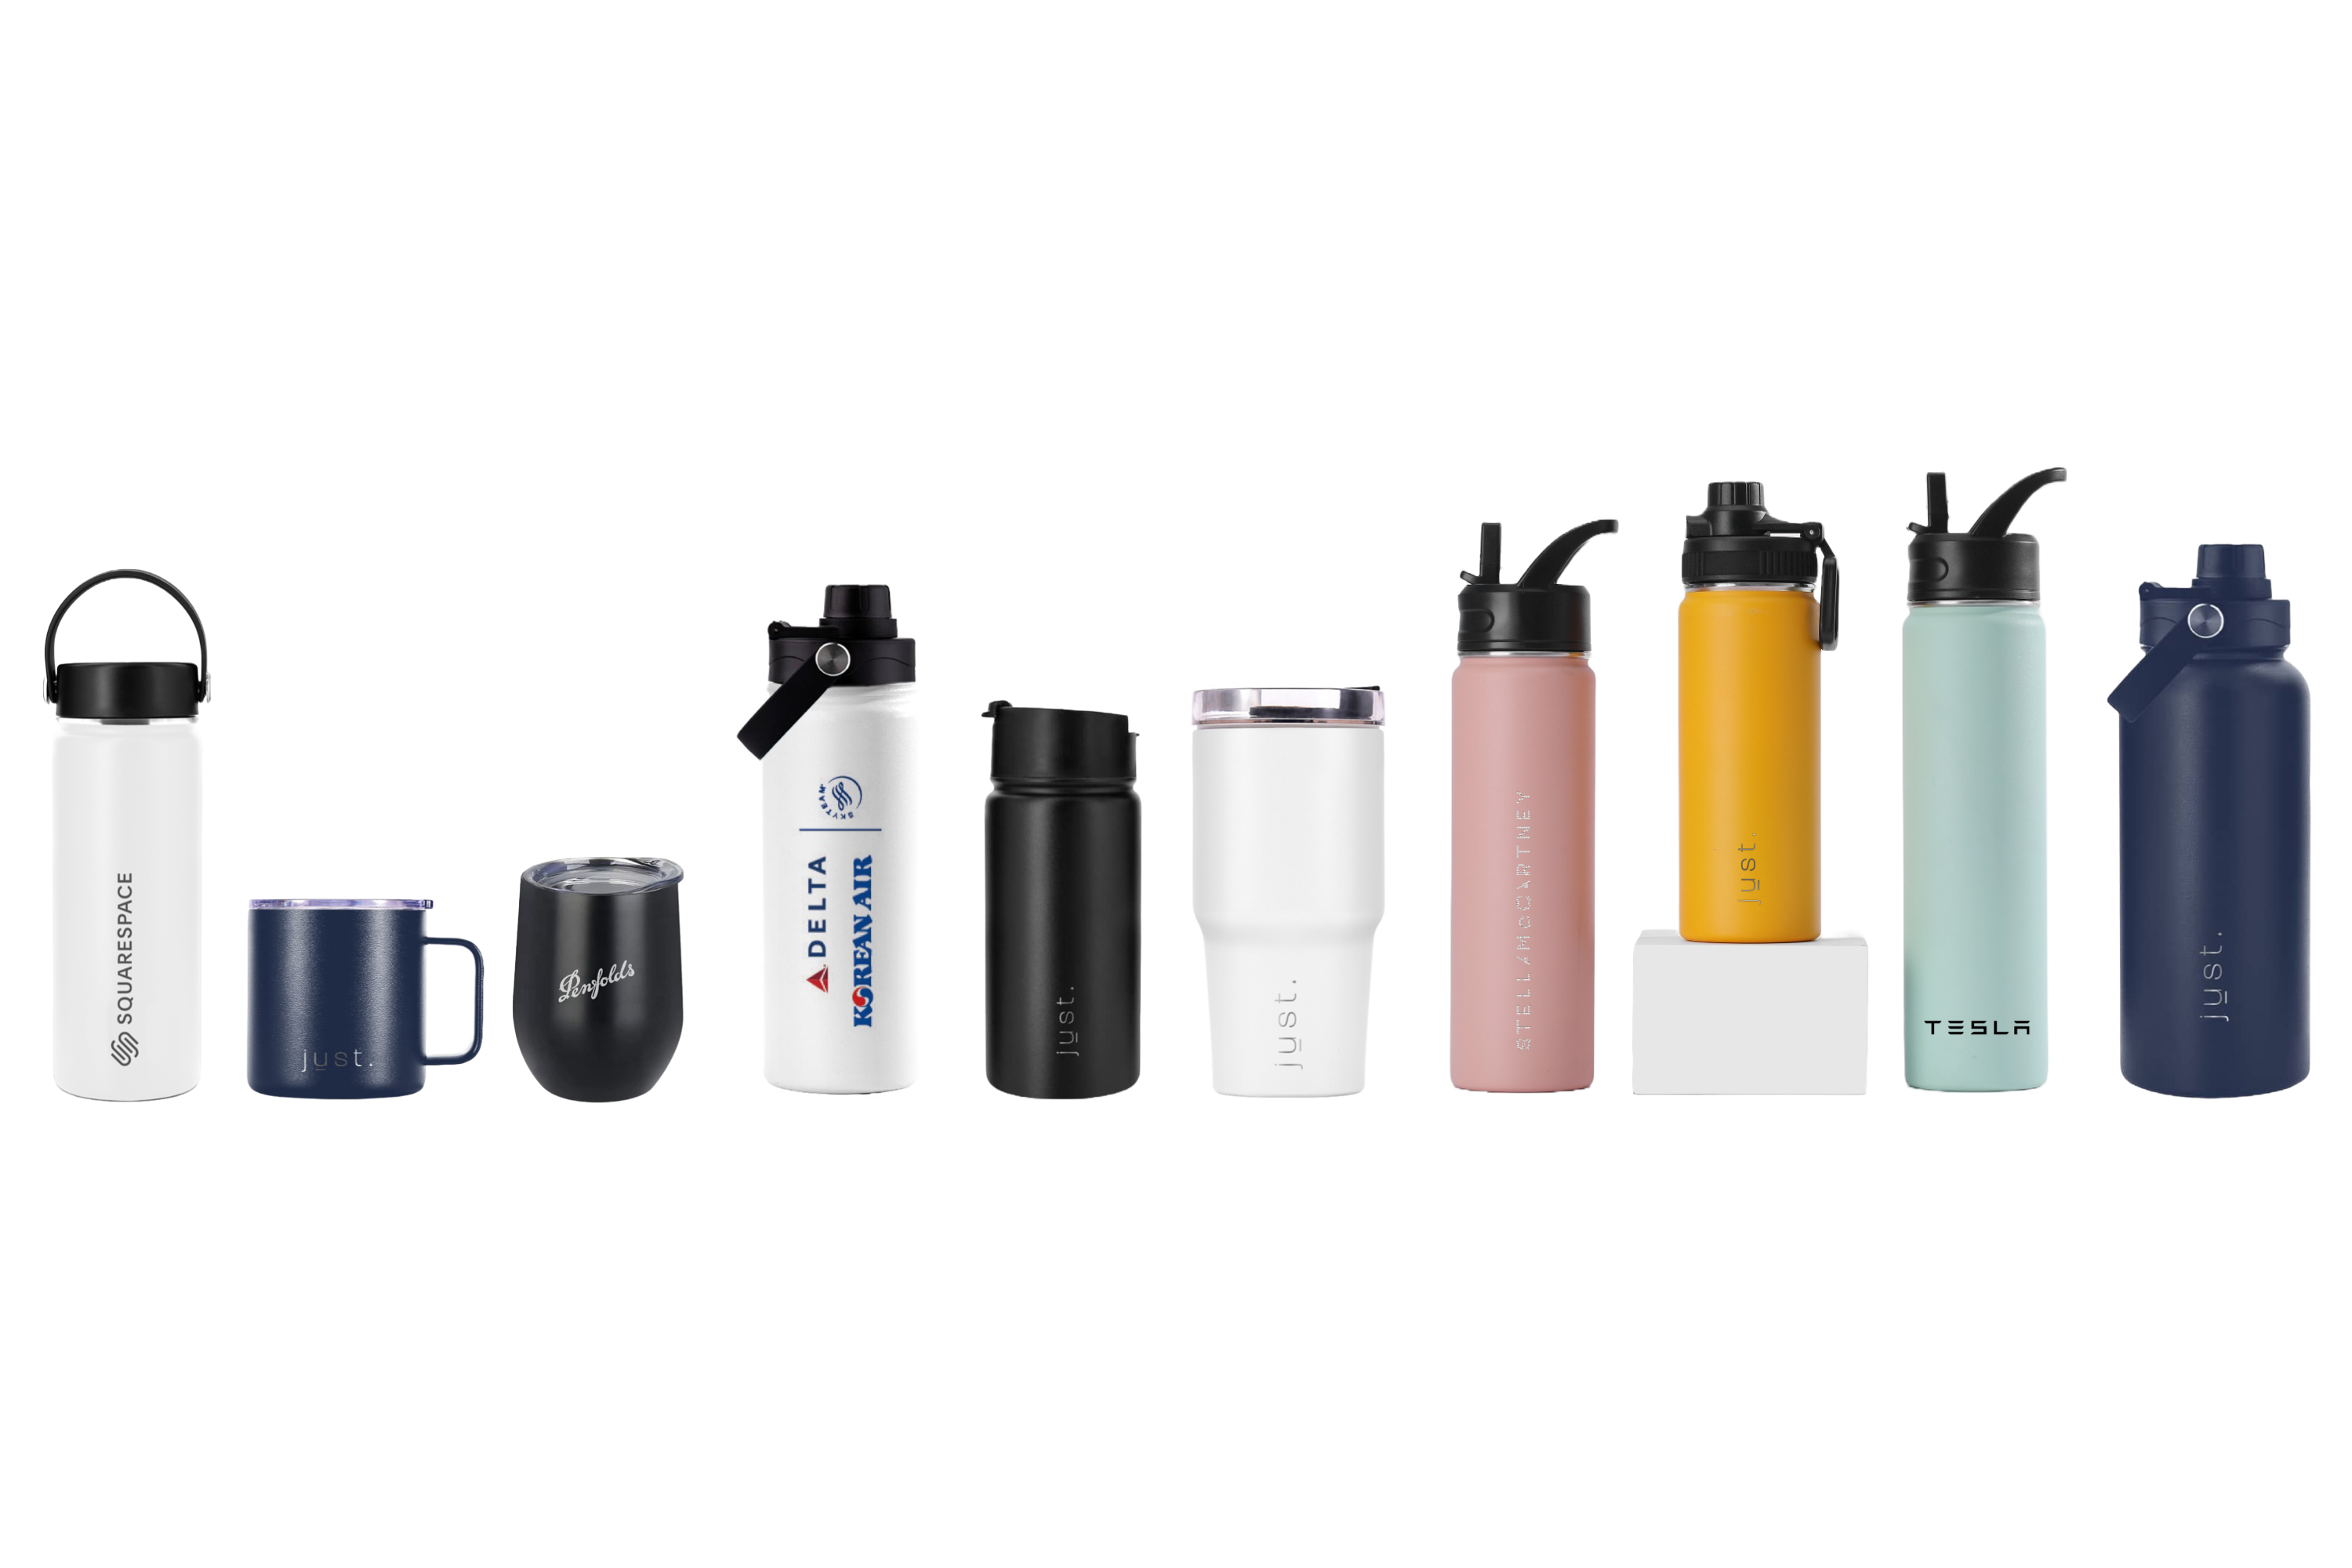 just bottle branded merchandise products in a line